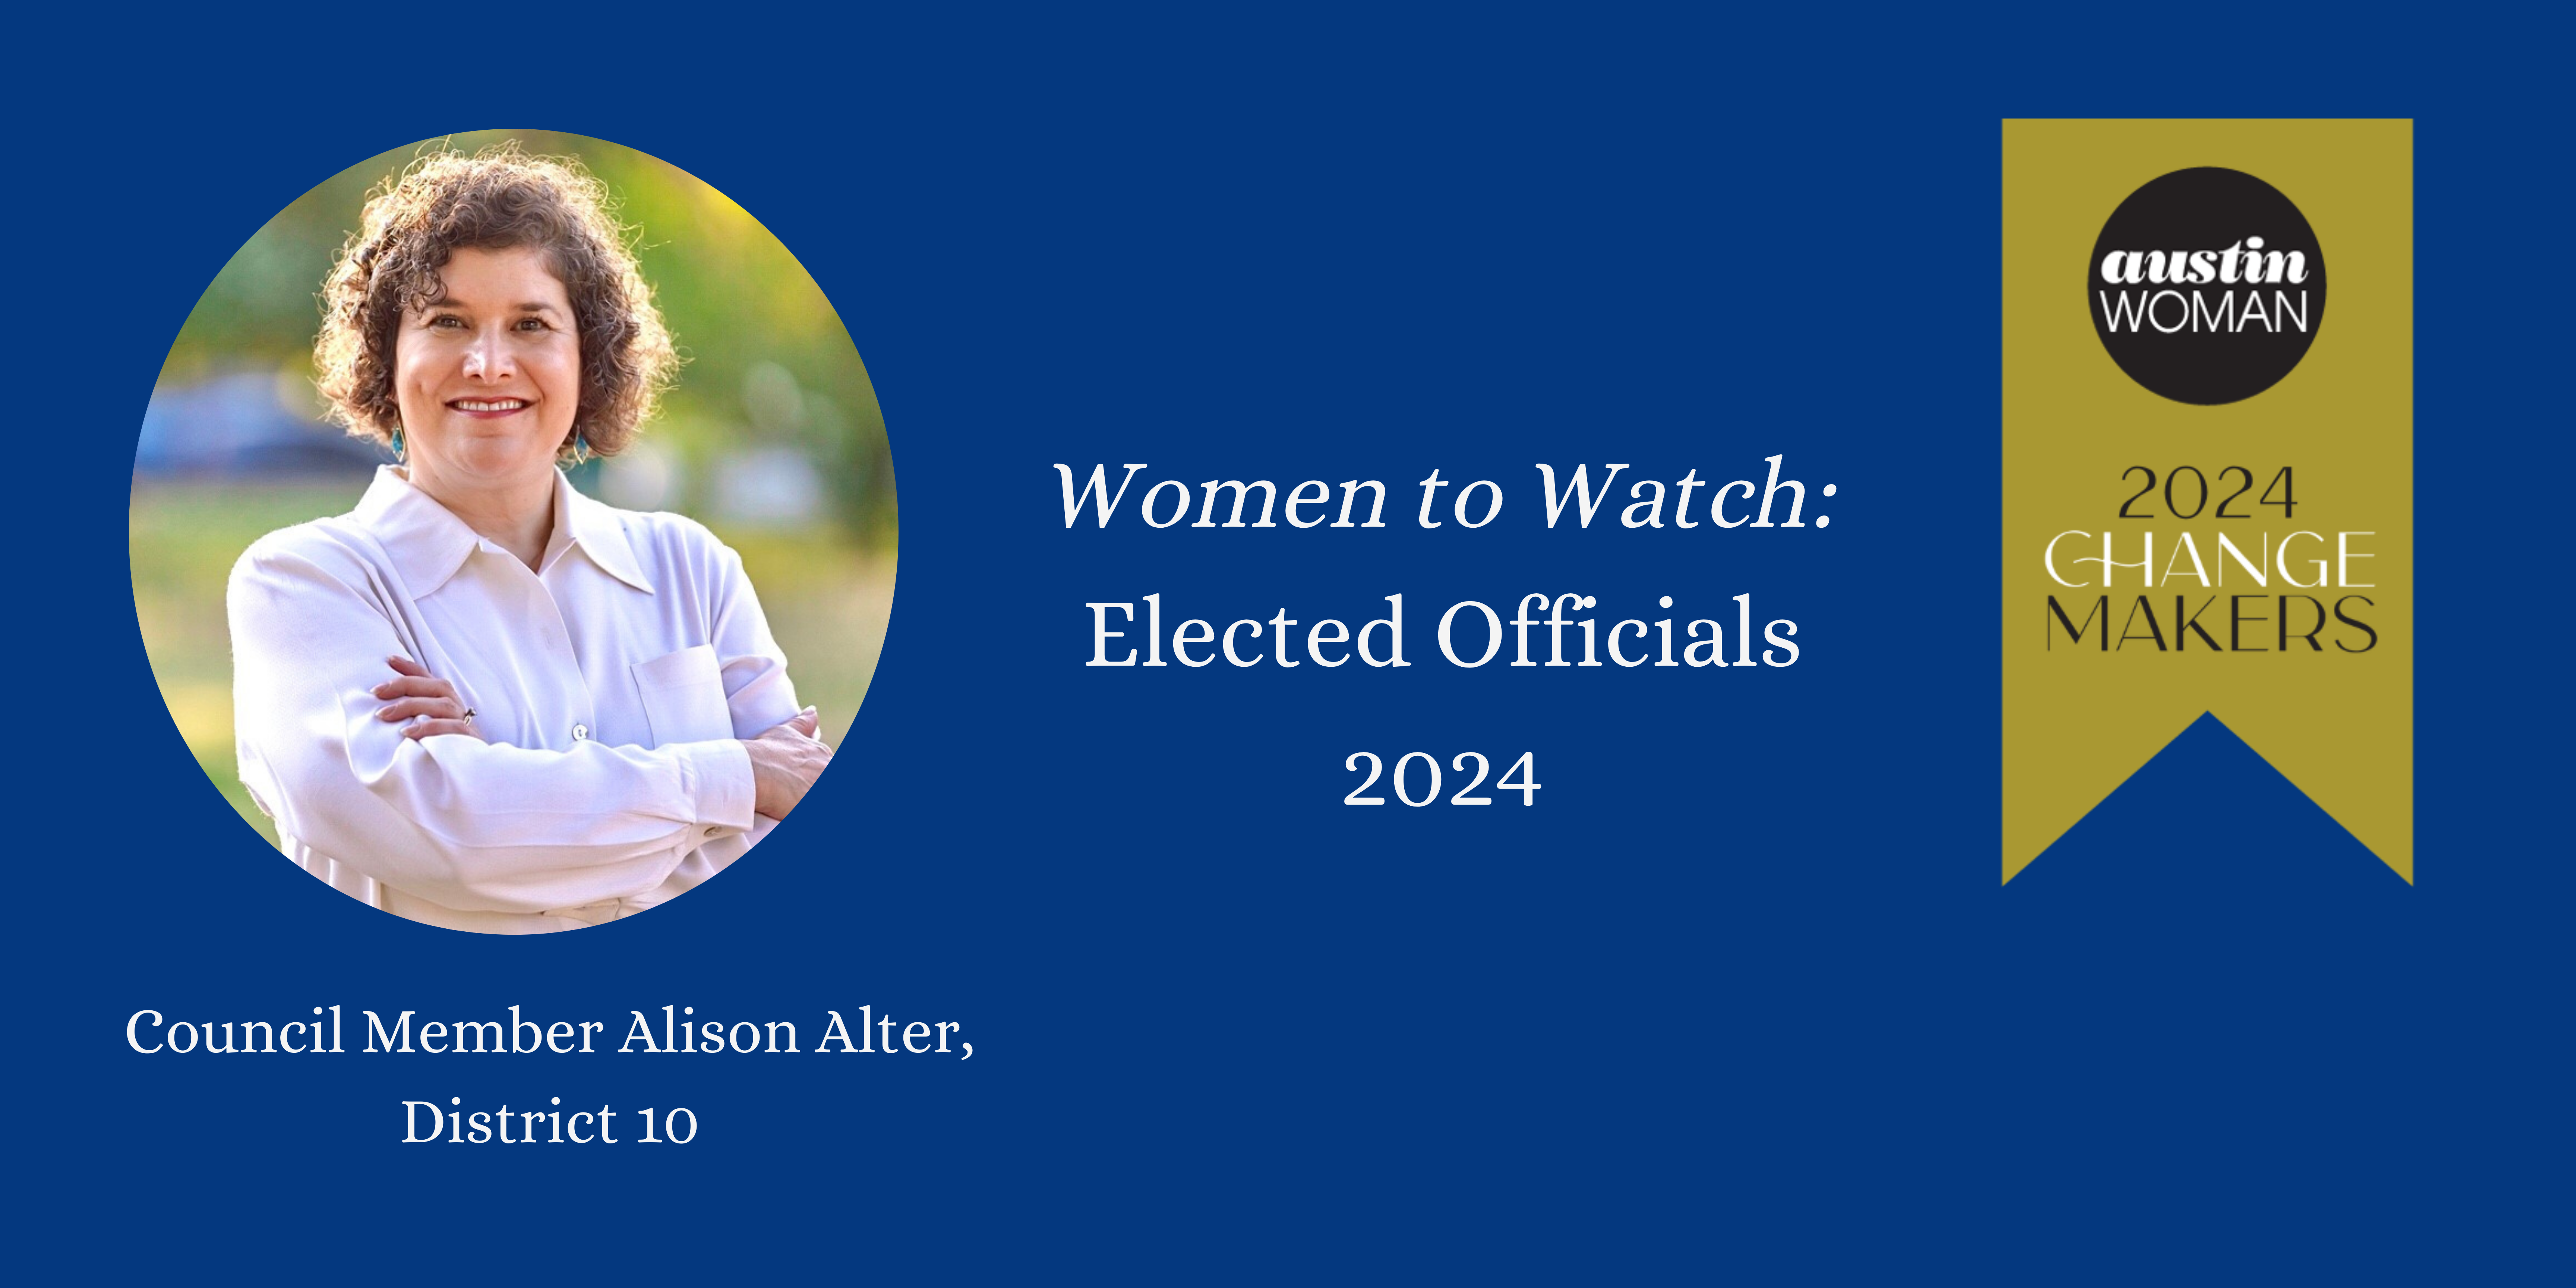 women to watch: elected officials banner